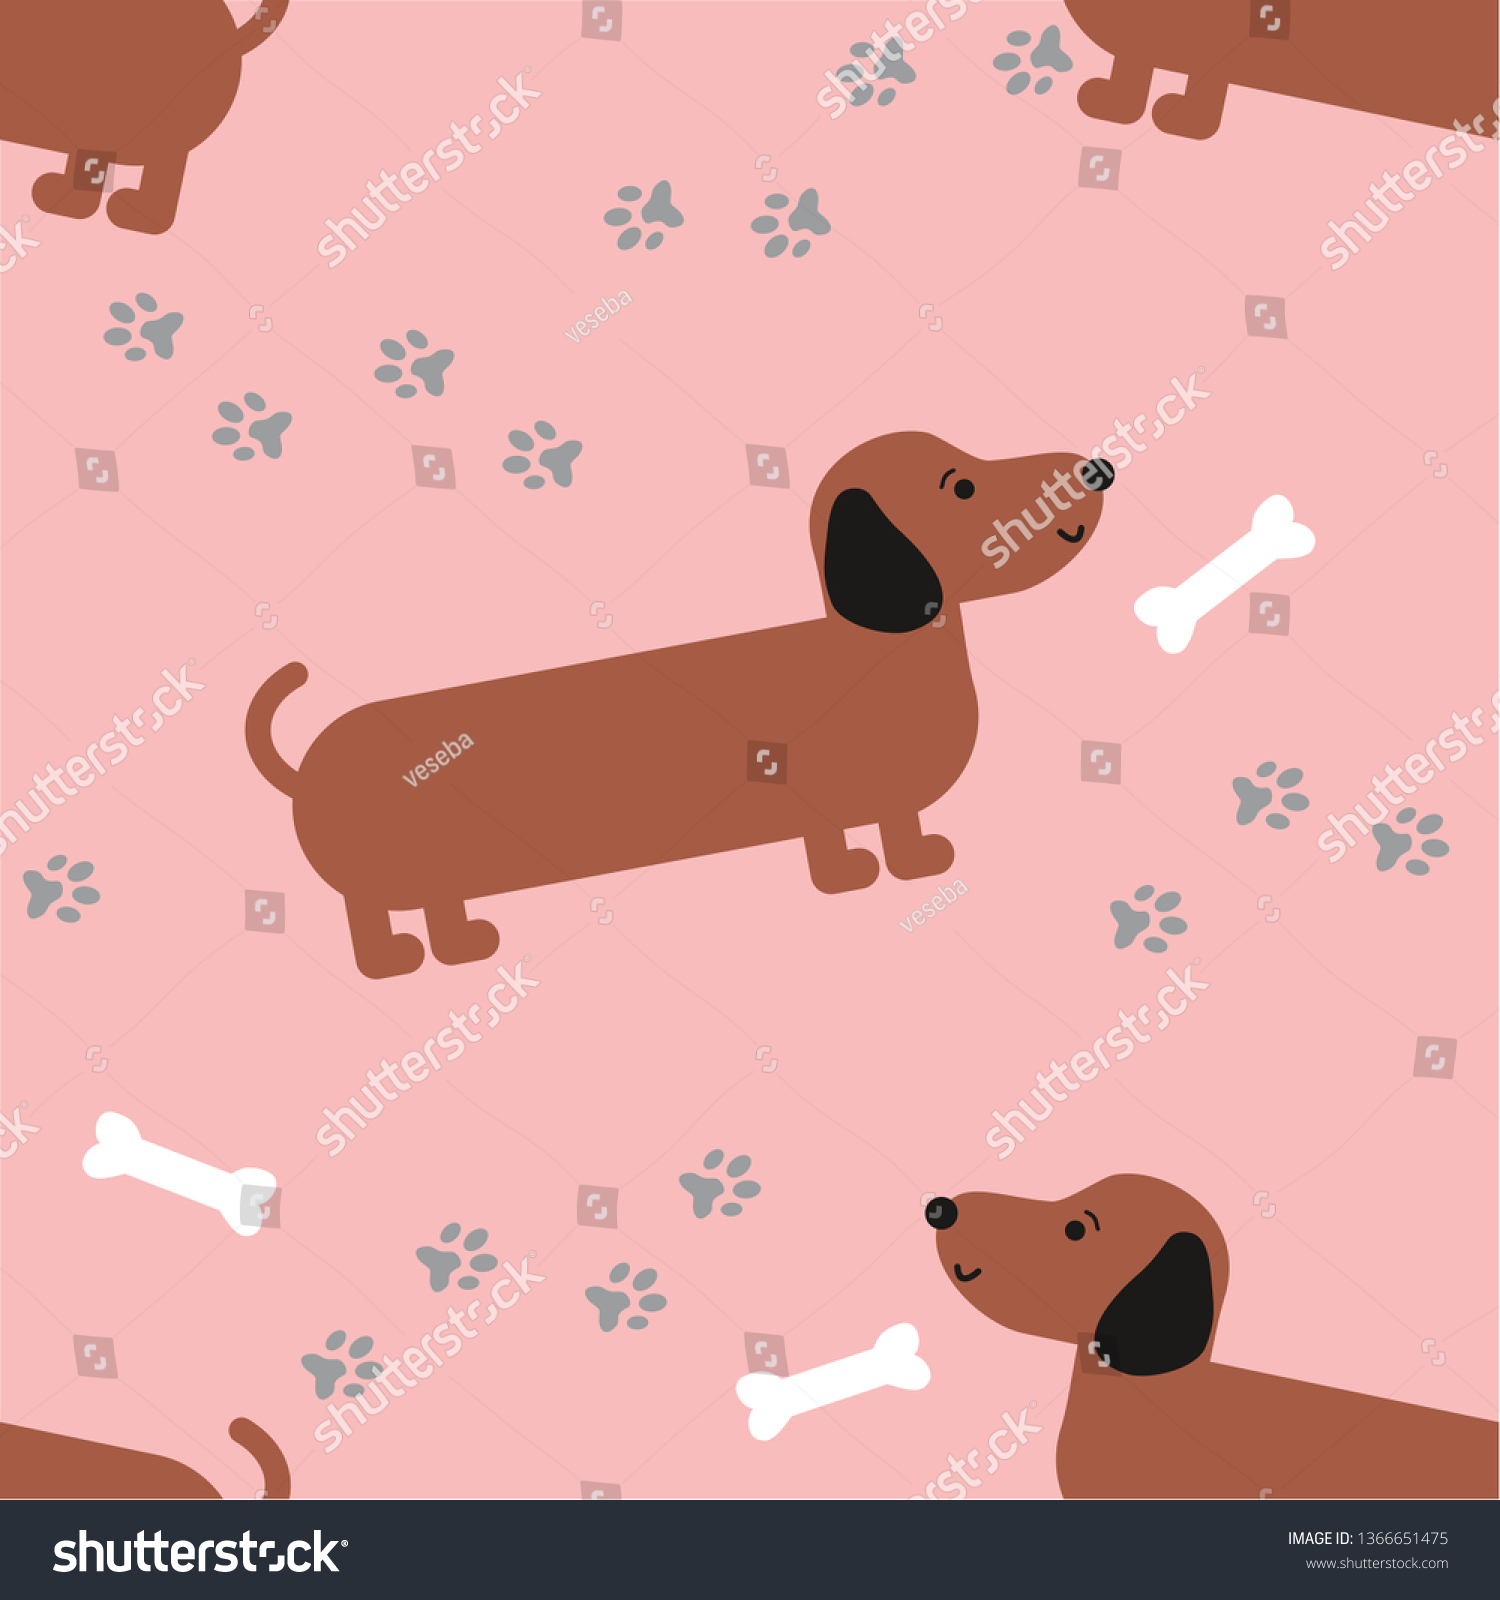 SVG of Seamless background with cute dog. Pet. Footprints of dog. Bone for dog. Children background with cute animal. Cartoon background. Pink girl background with sausage dog.  svg